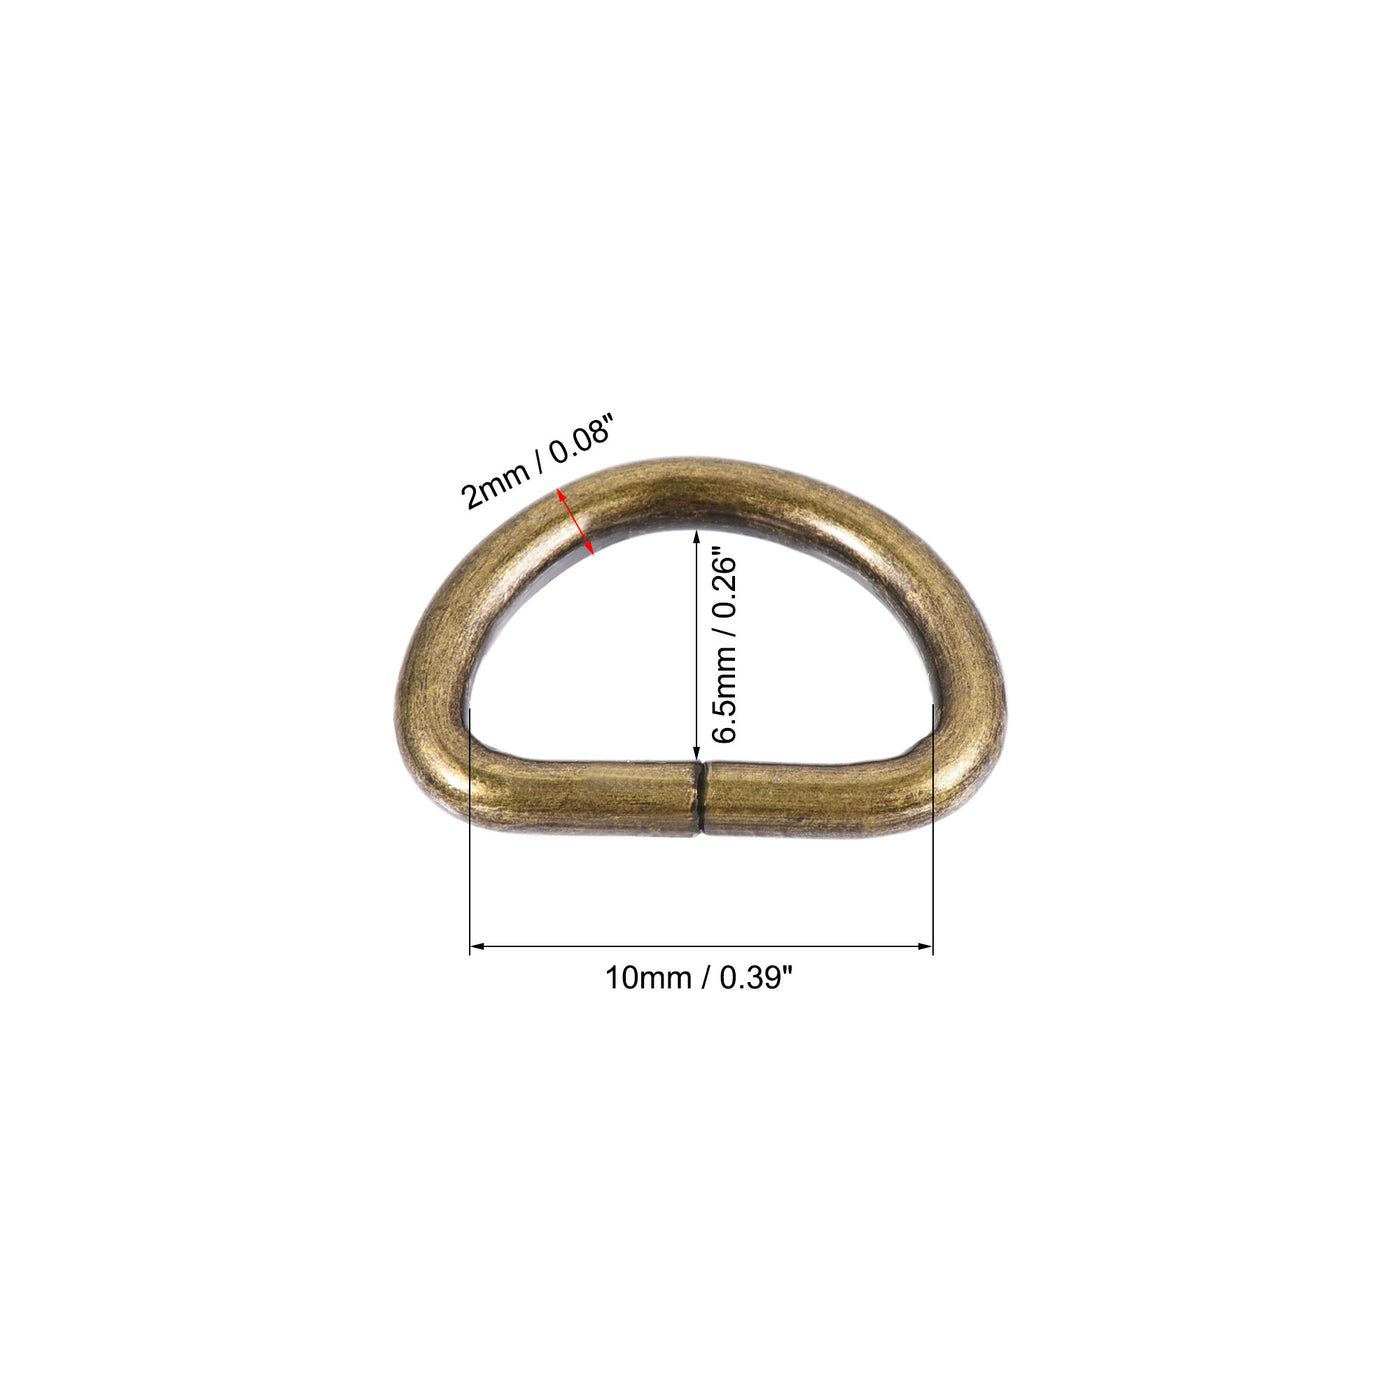 uxcell Uxcell Metal D Ring 0.39"(10mm) D-Rings Buckle for Hardware Bags Belts Craft DIY Accessories Bronze Tone 100pcs